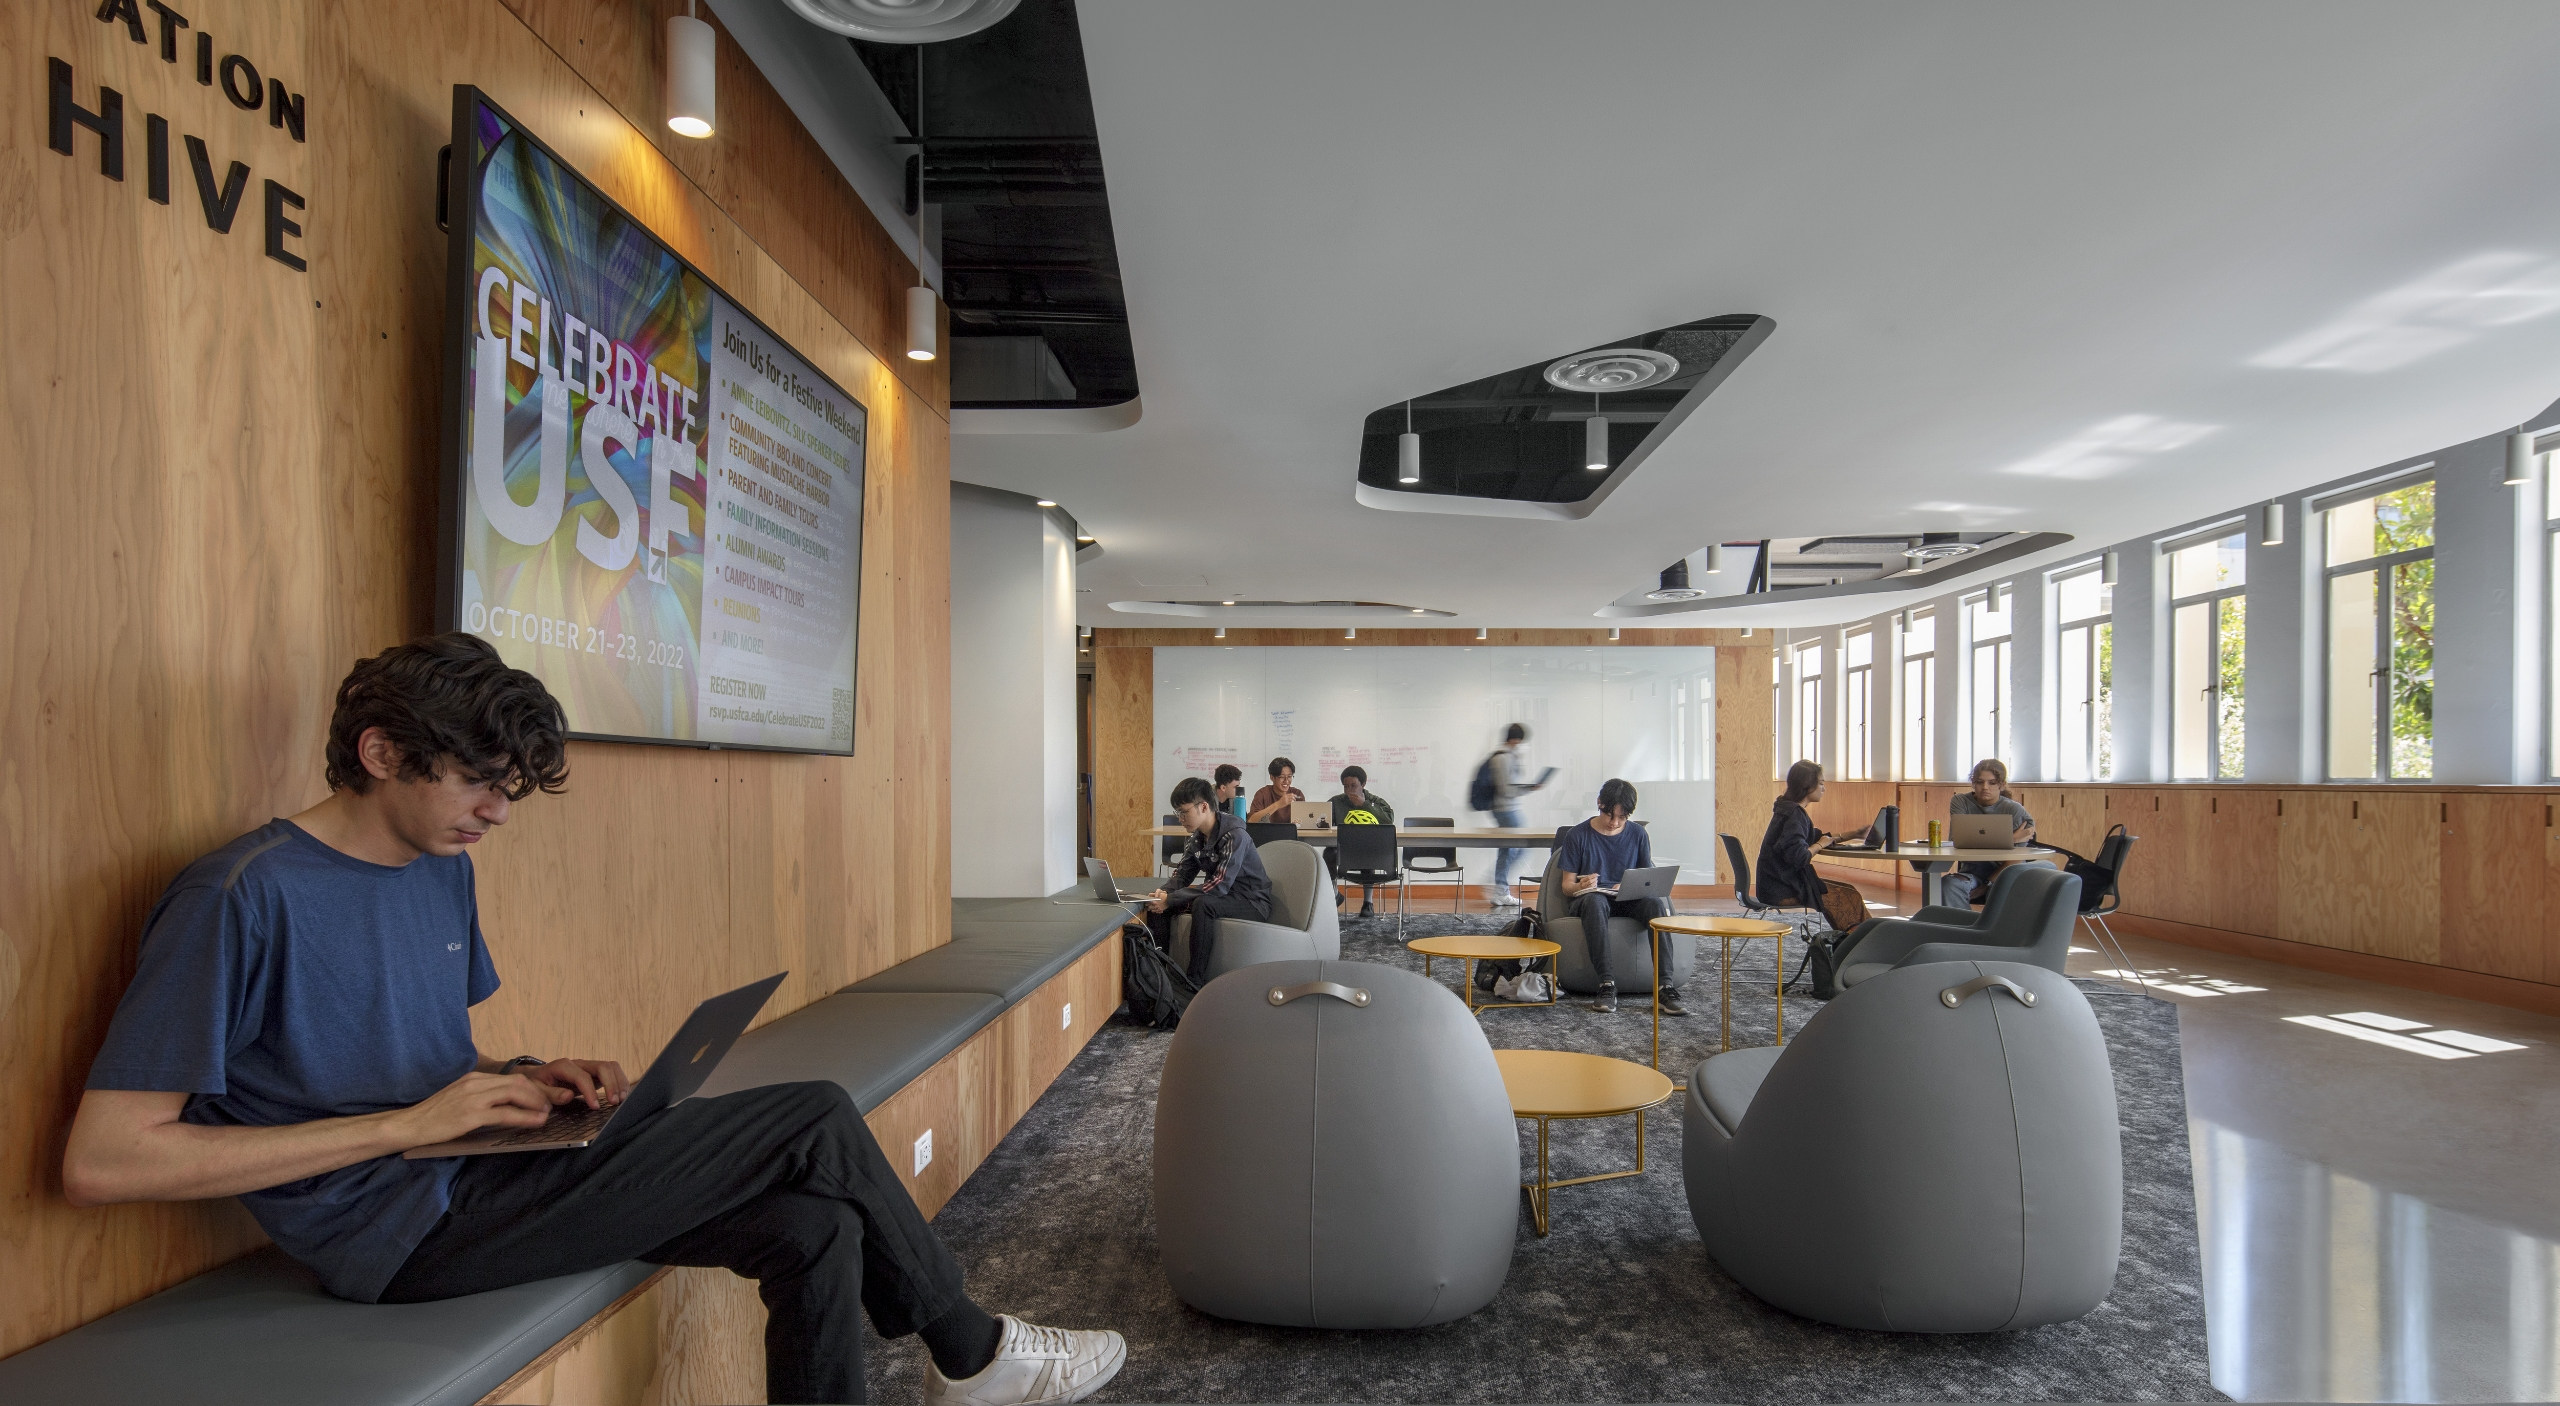 University of San Francisco - Harney Science Center, Innovation Hive: Students in open study area